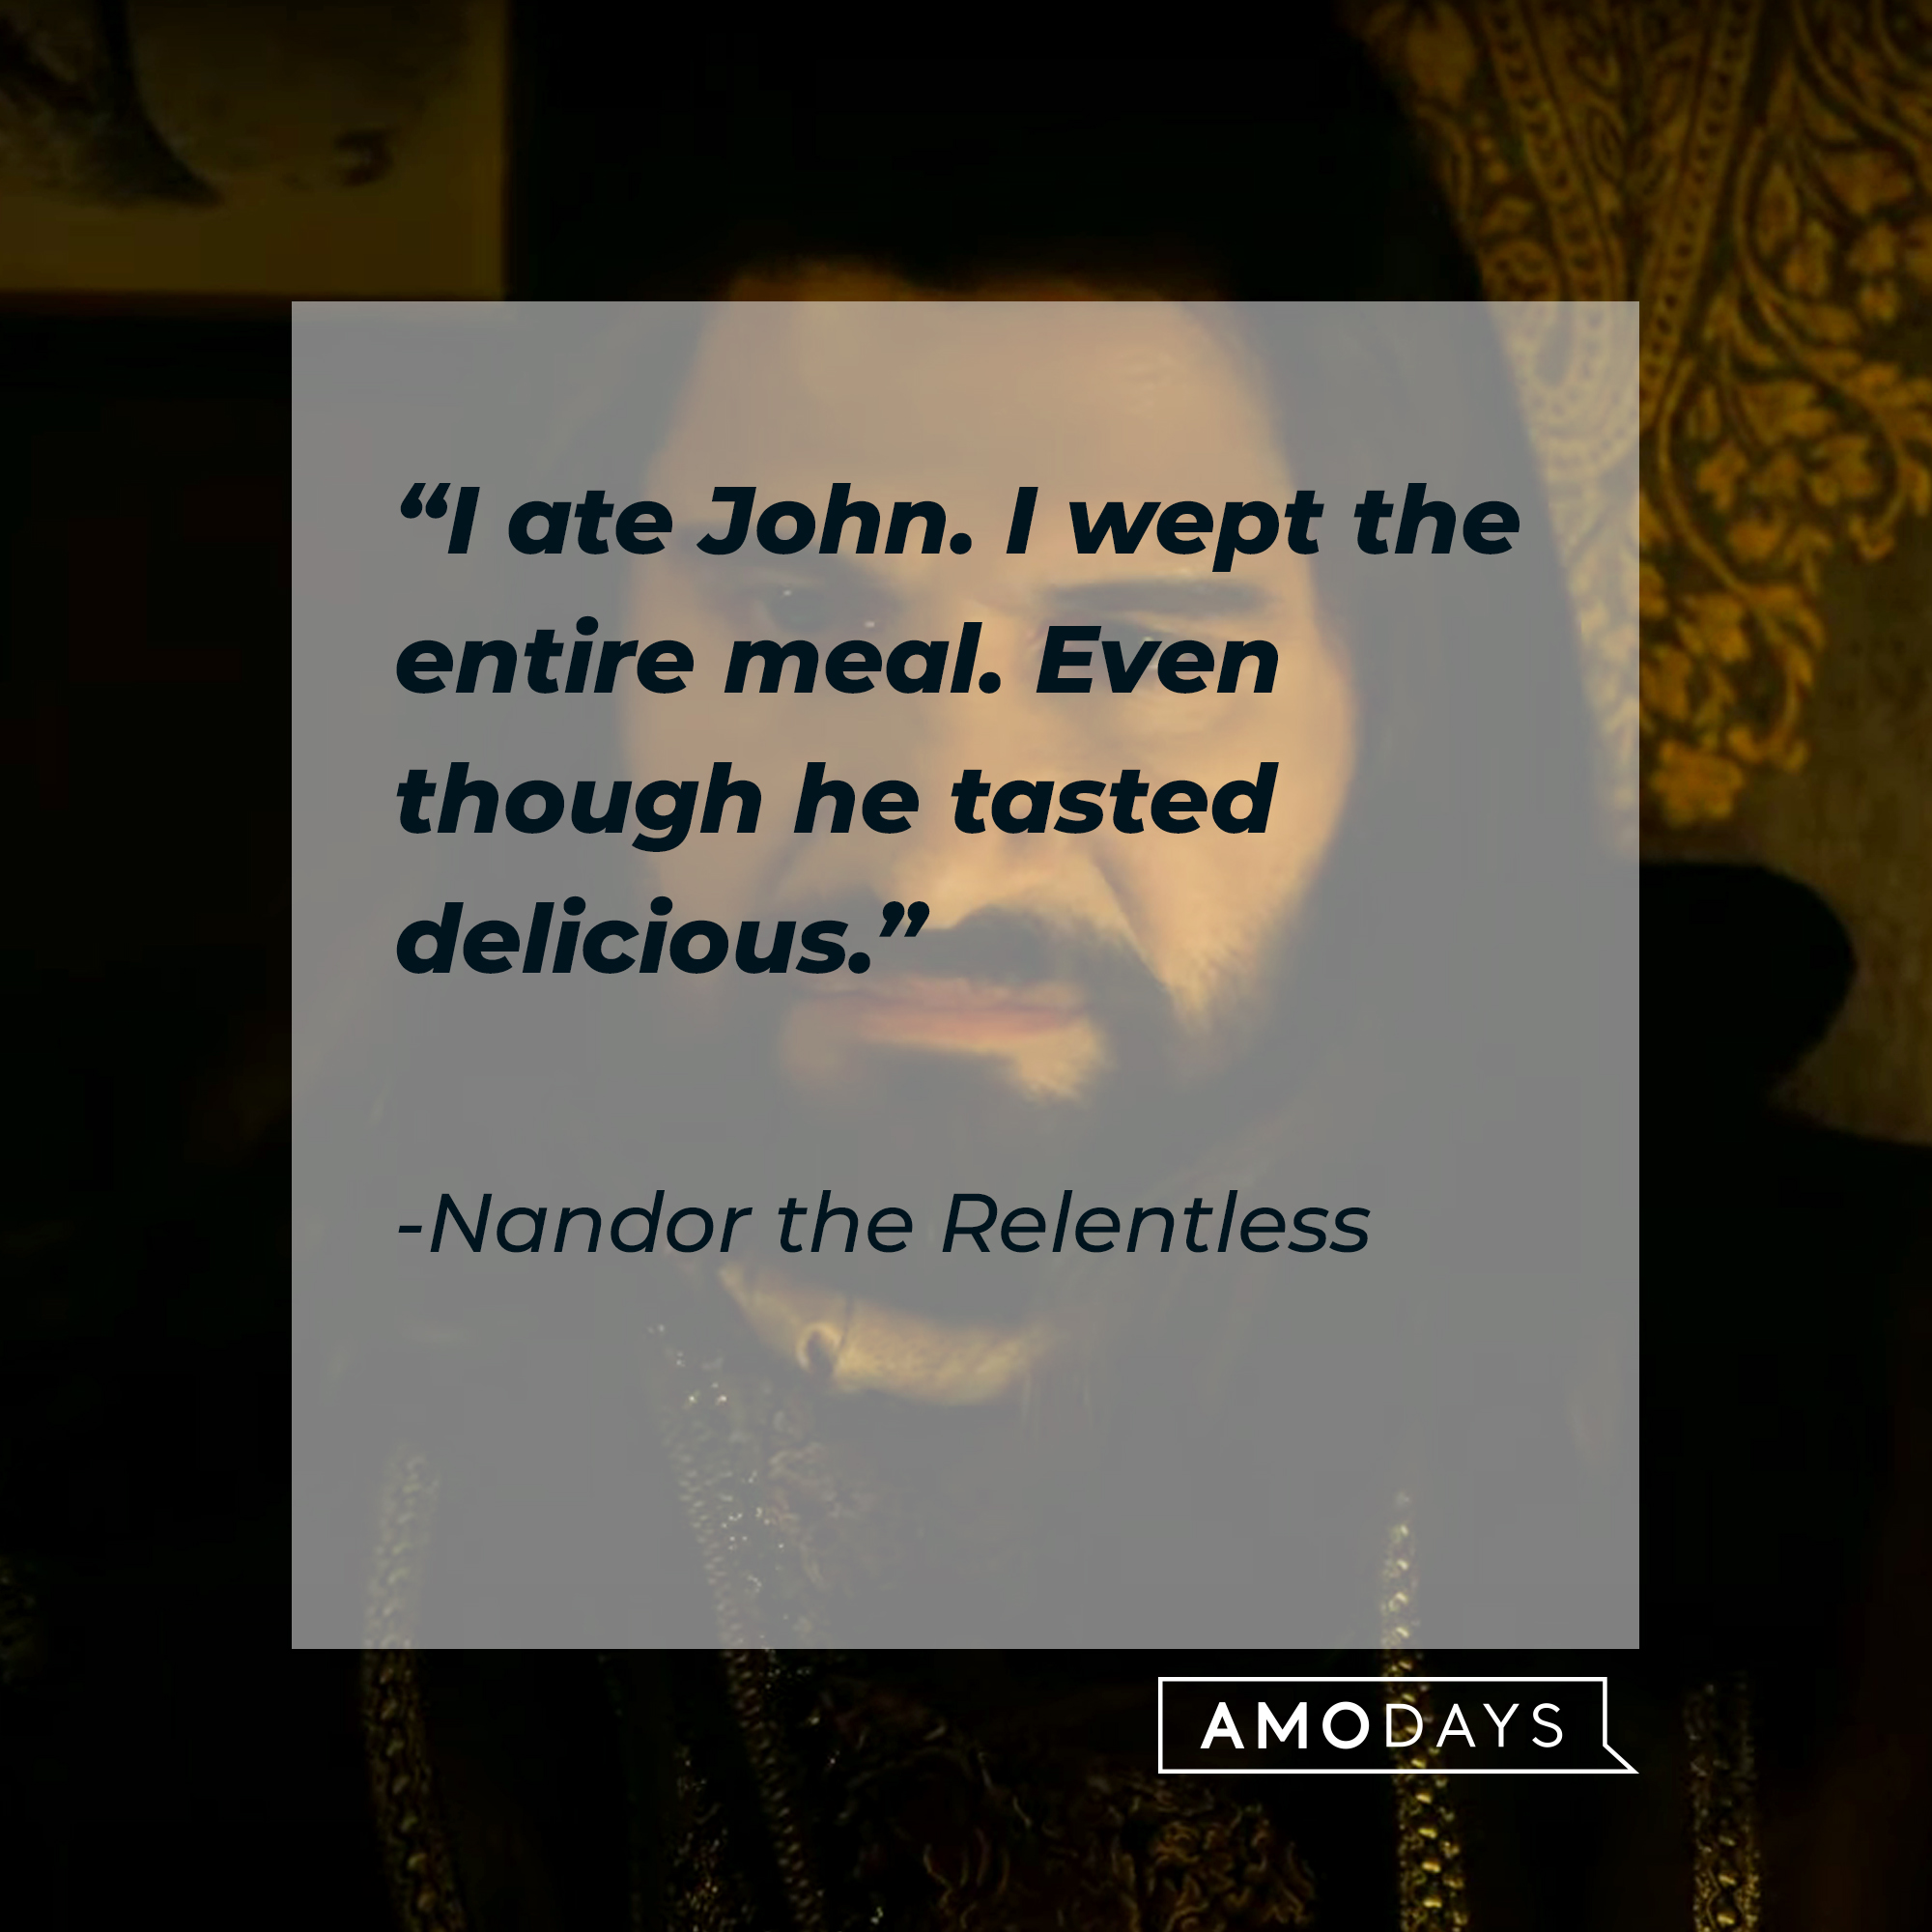 Nandor the Relentless, with his quote: "I ate John. I wept the entire meal. Even though he tasted delicious.” | Source: Facebook.com/TheShadowsFX